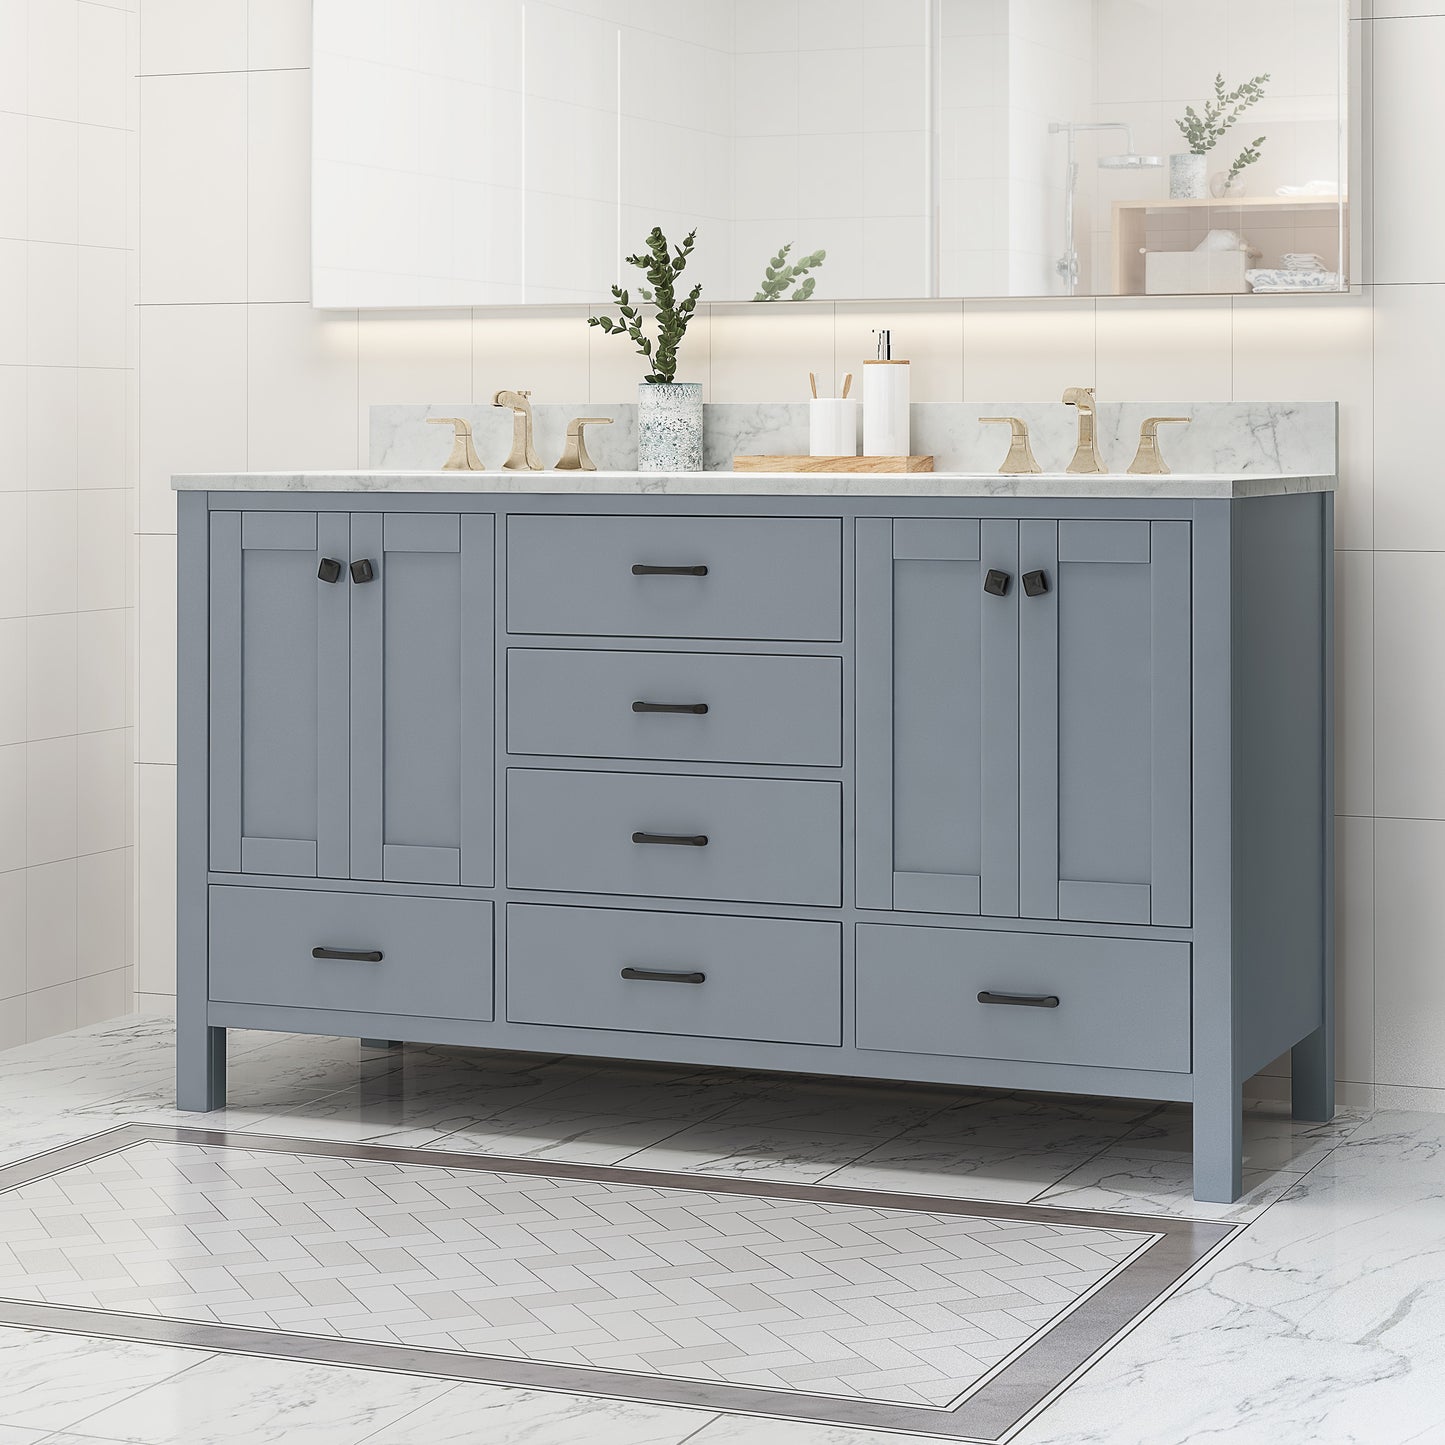 Laranne Contemporary 60" Wood Double Sink Bathroom Vanity with Marble Counter Top with Carrara White Marble